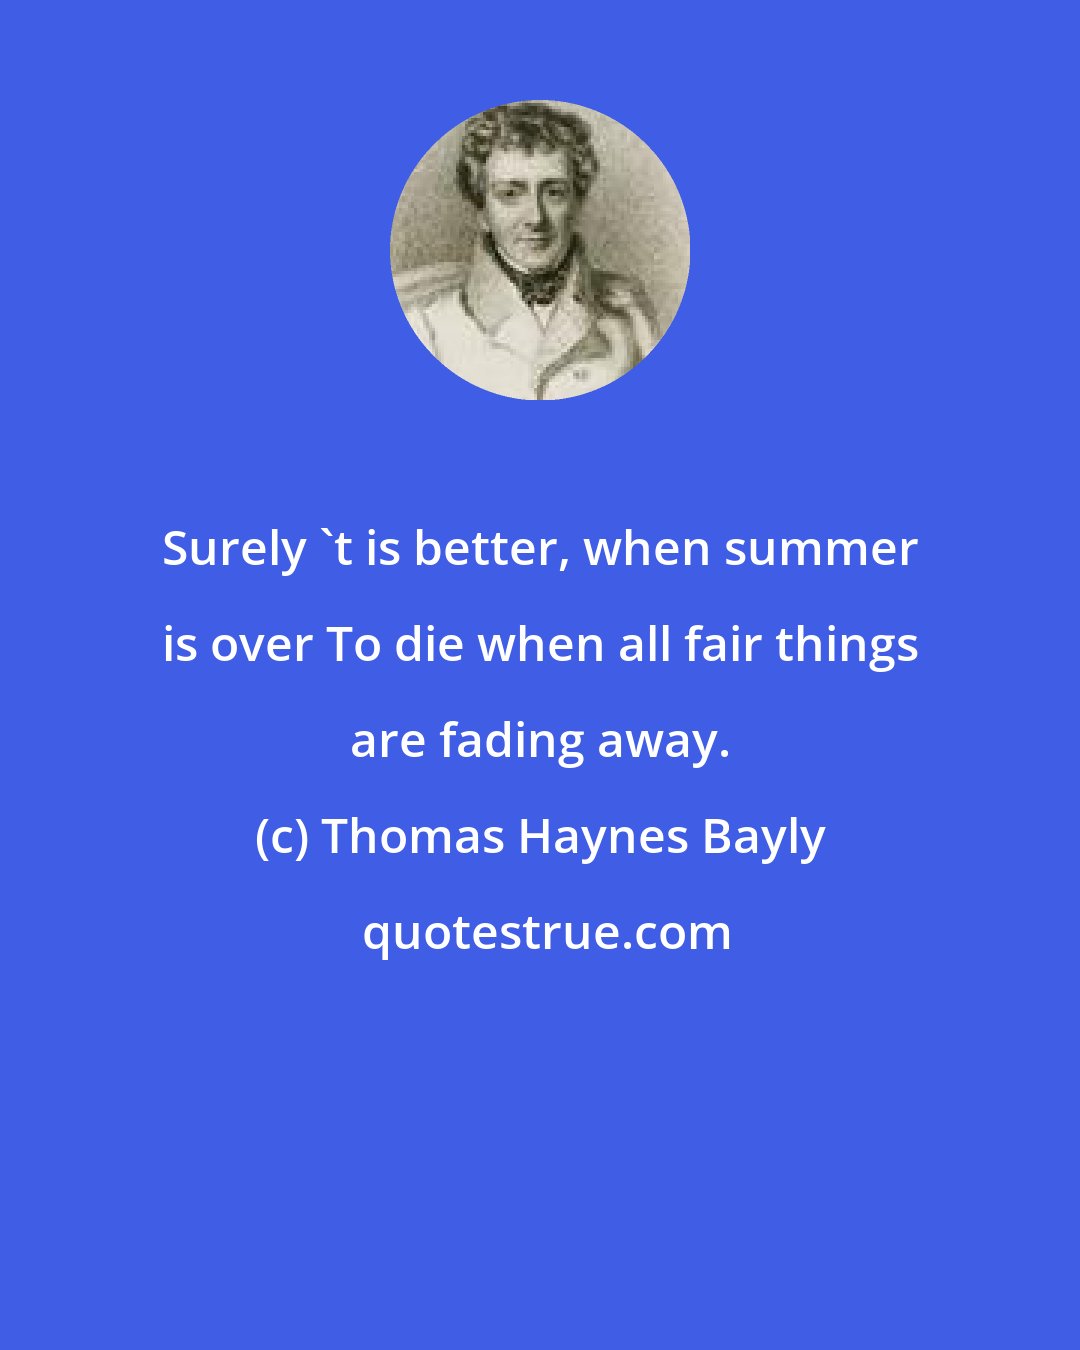 Thomas Haynes Bayly: Surely 't is better, when summer is over To die when all fair things are fading away.